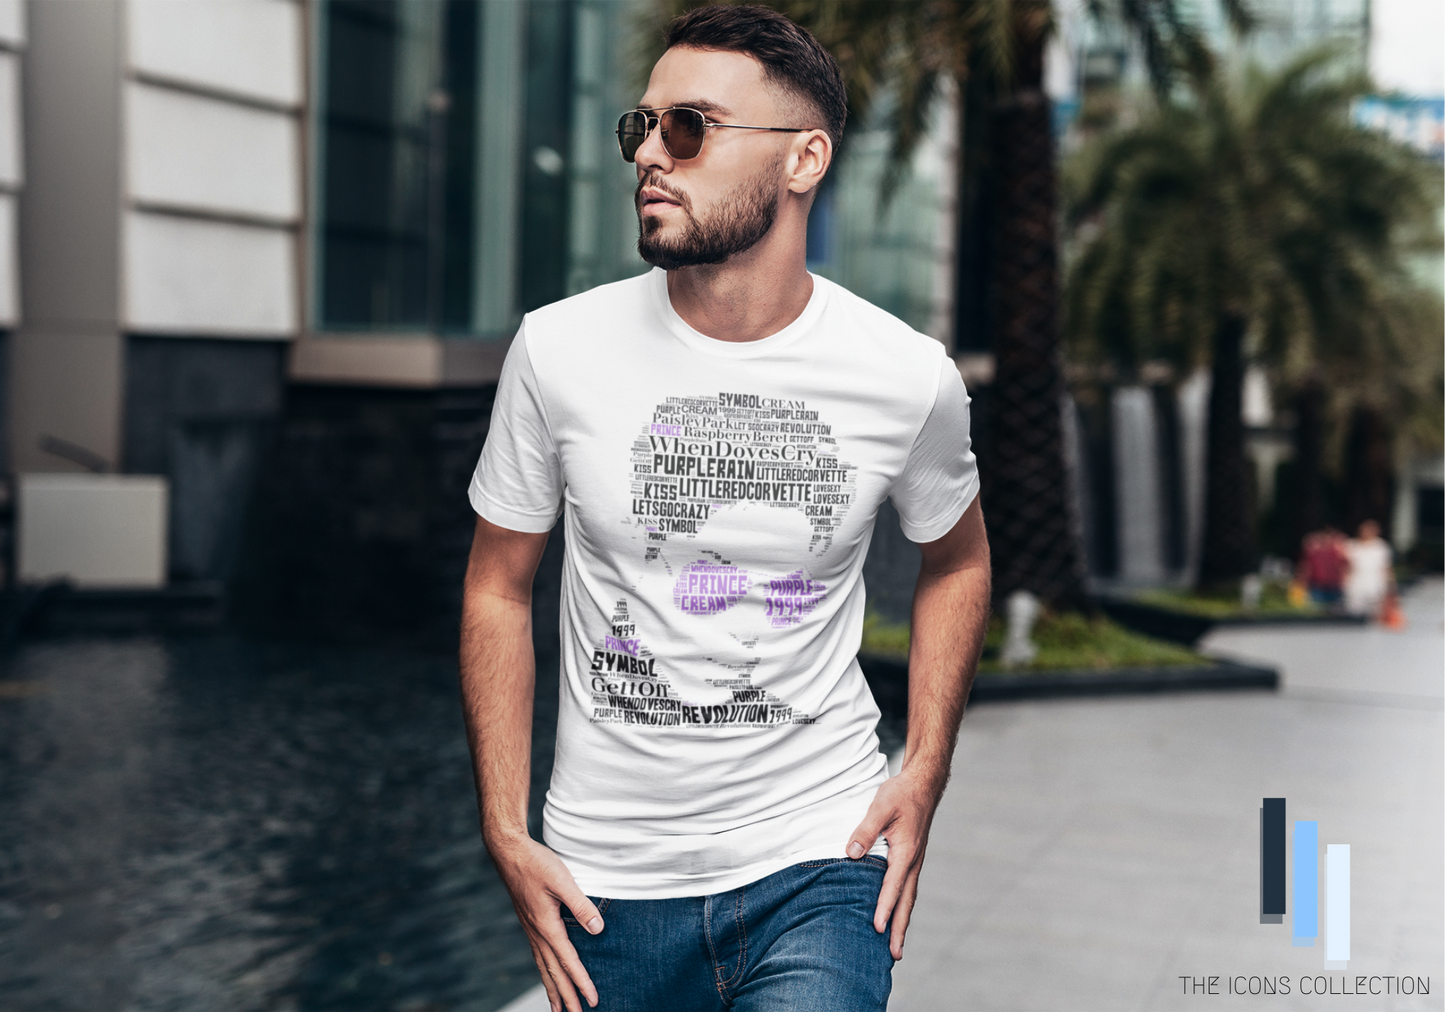 Prince Purple Rain tribute in songs / Premium Quality Supersoft T Shirt